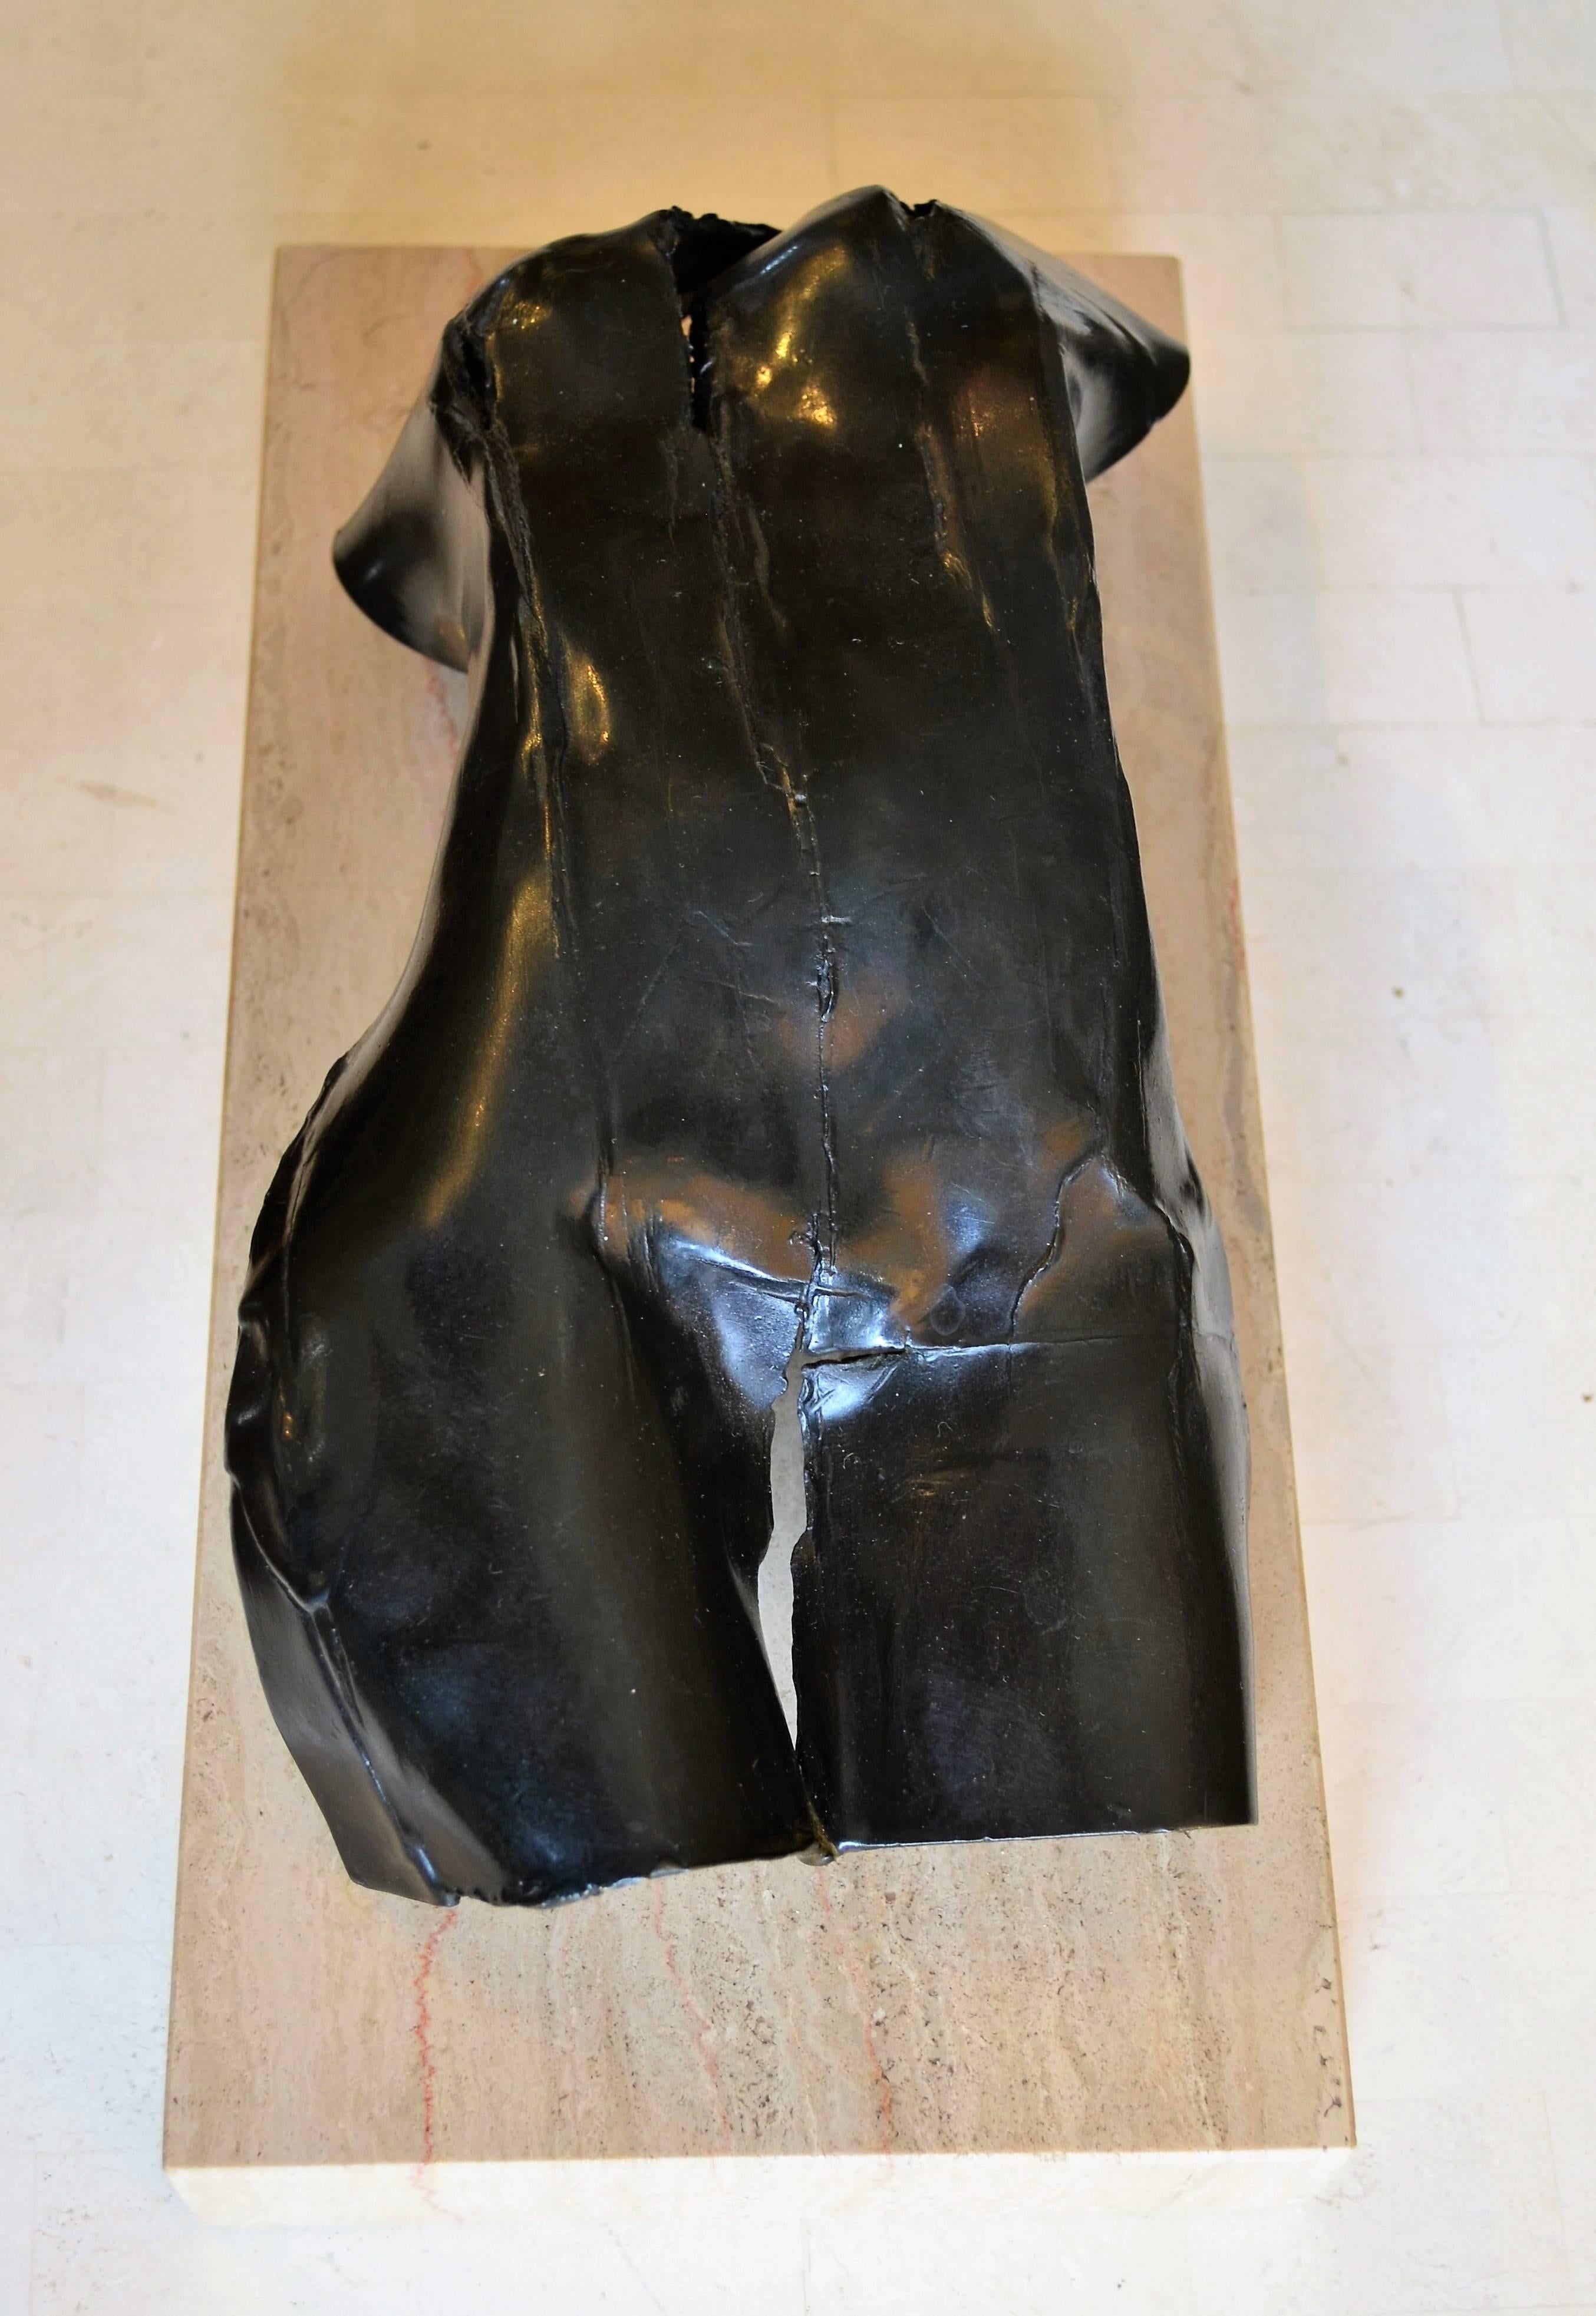 A figural recumbent female bronze nude sculpture.
The sculpture is signed Liberton and is mounted on a marble base.